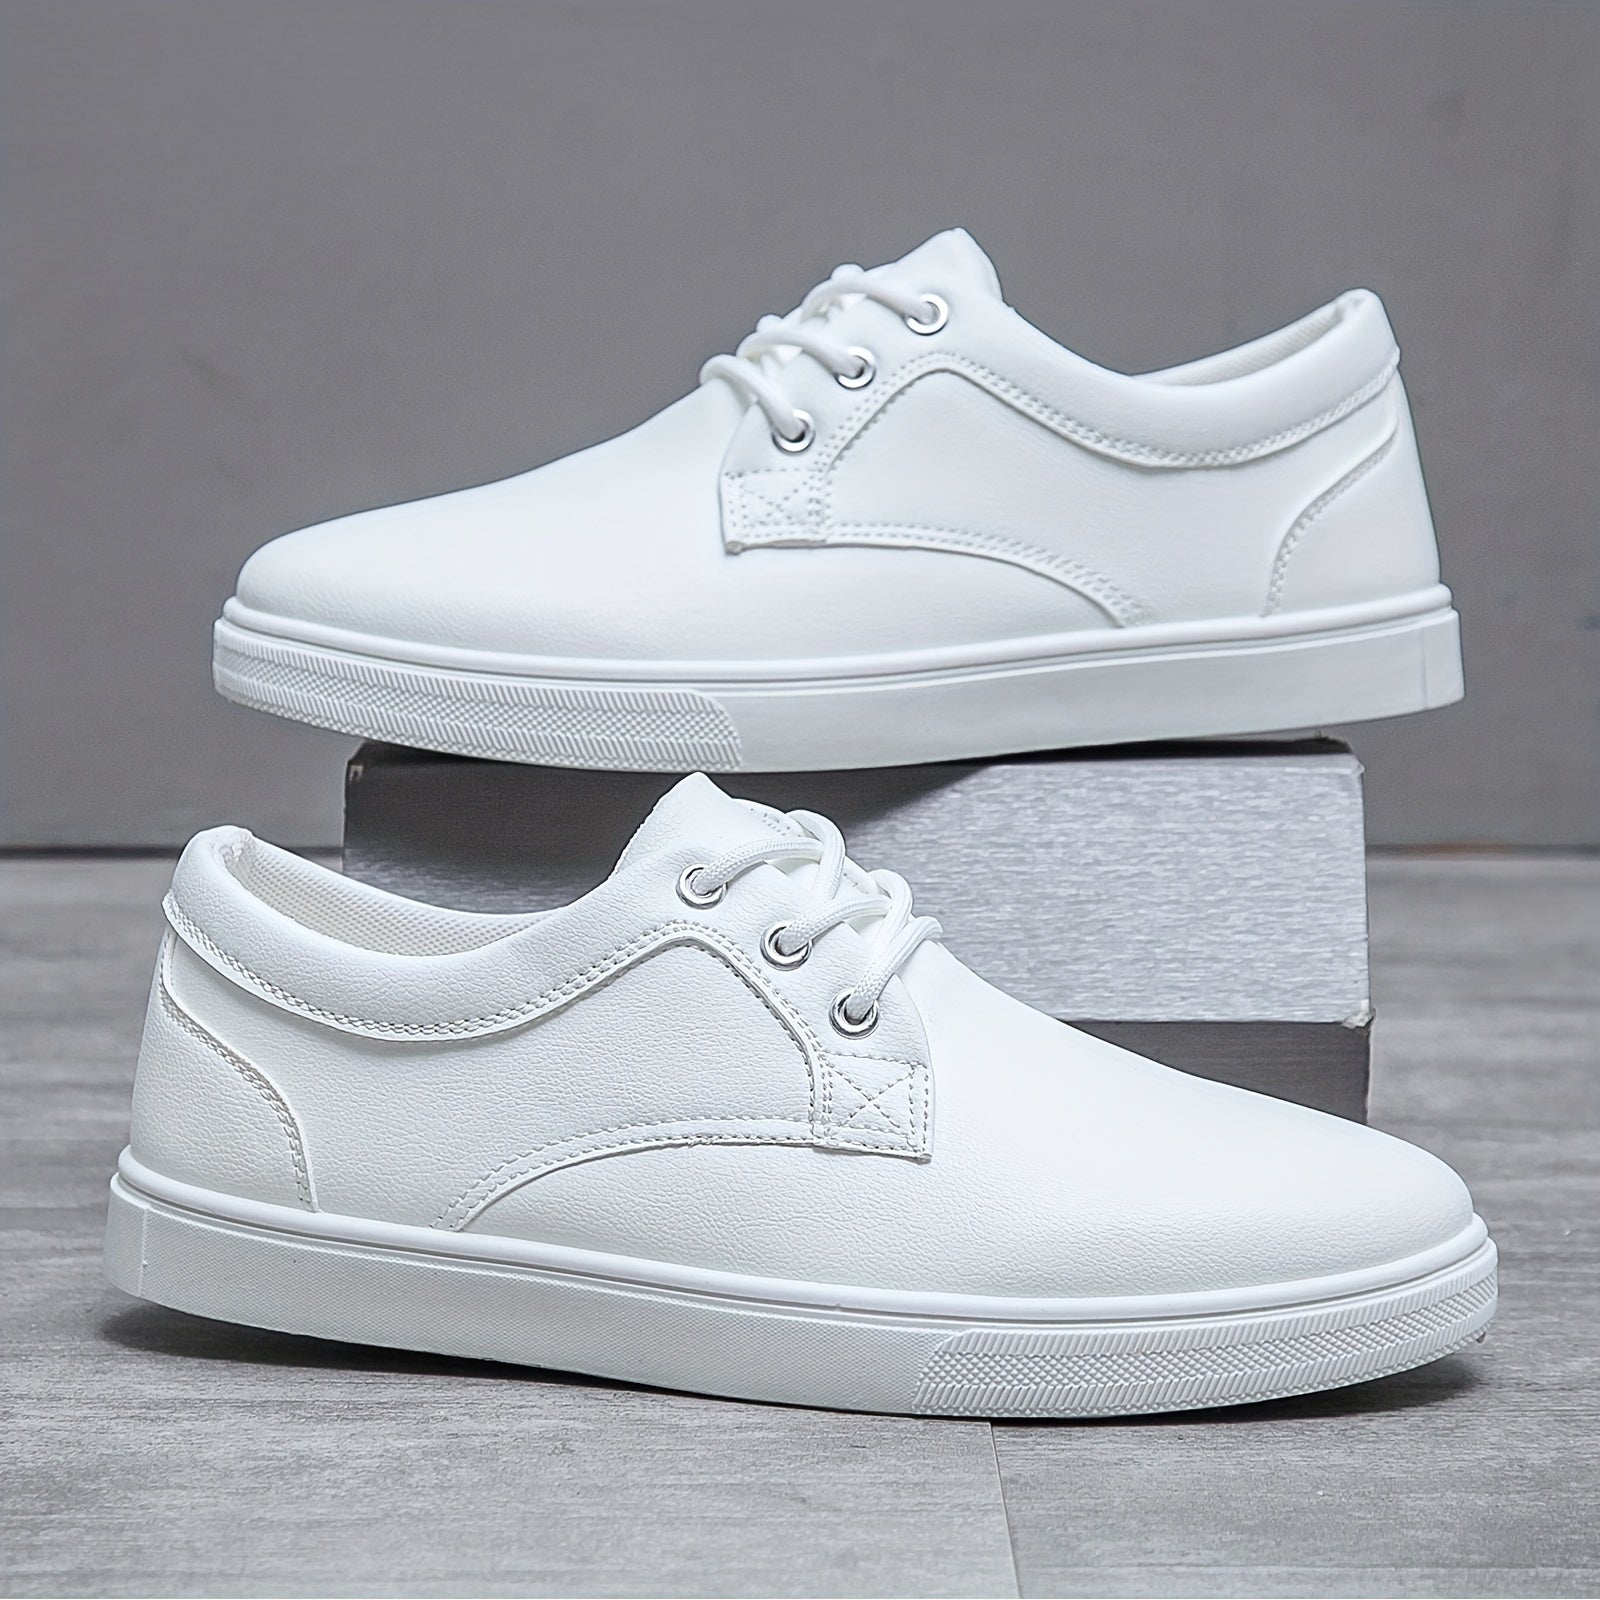 pu leather skate shoes: Durable PU Leather, Breathable Design, Enhanced Traction - Men's Shoes-CasualFlowshop 